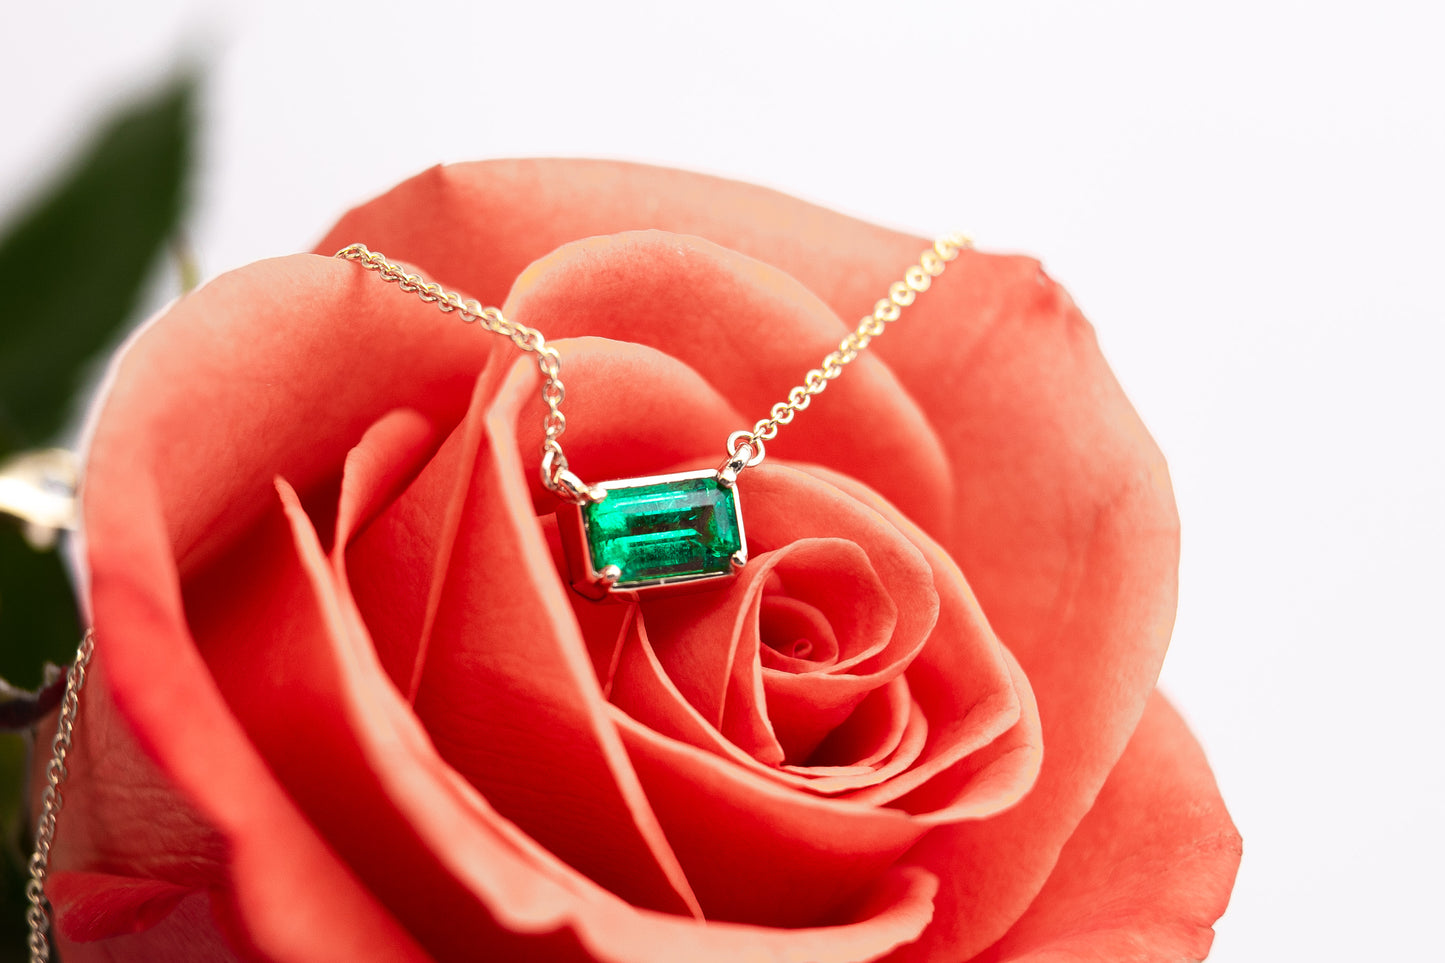 Emerald Gold Necklace